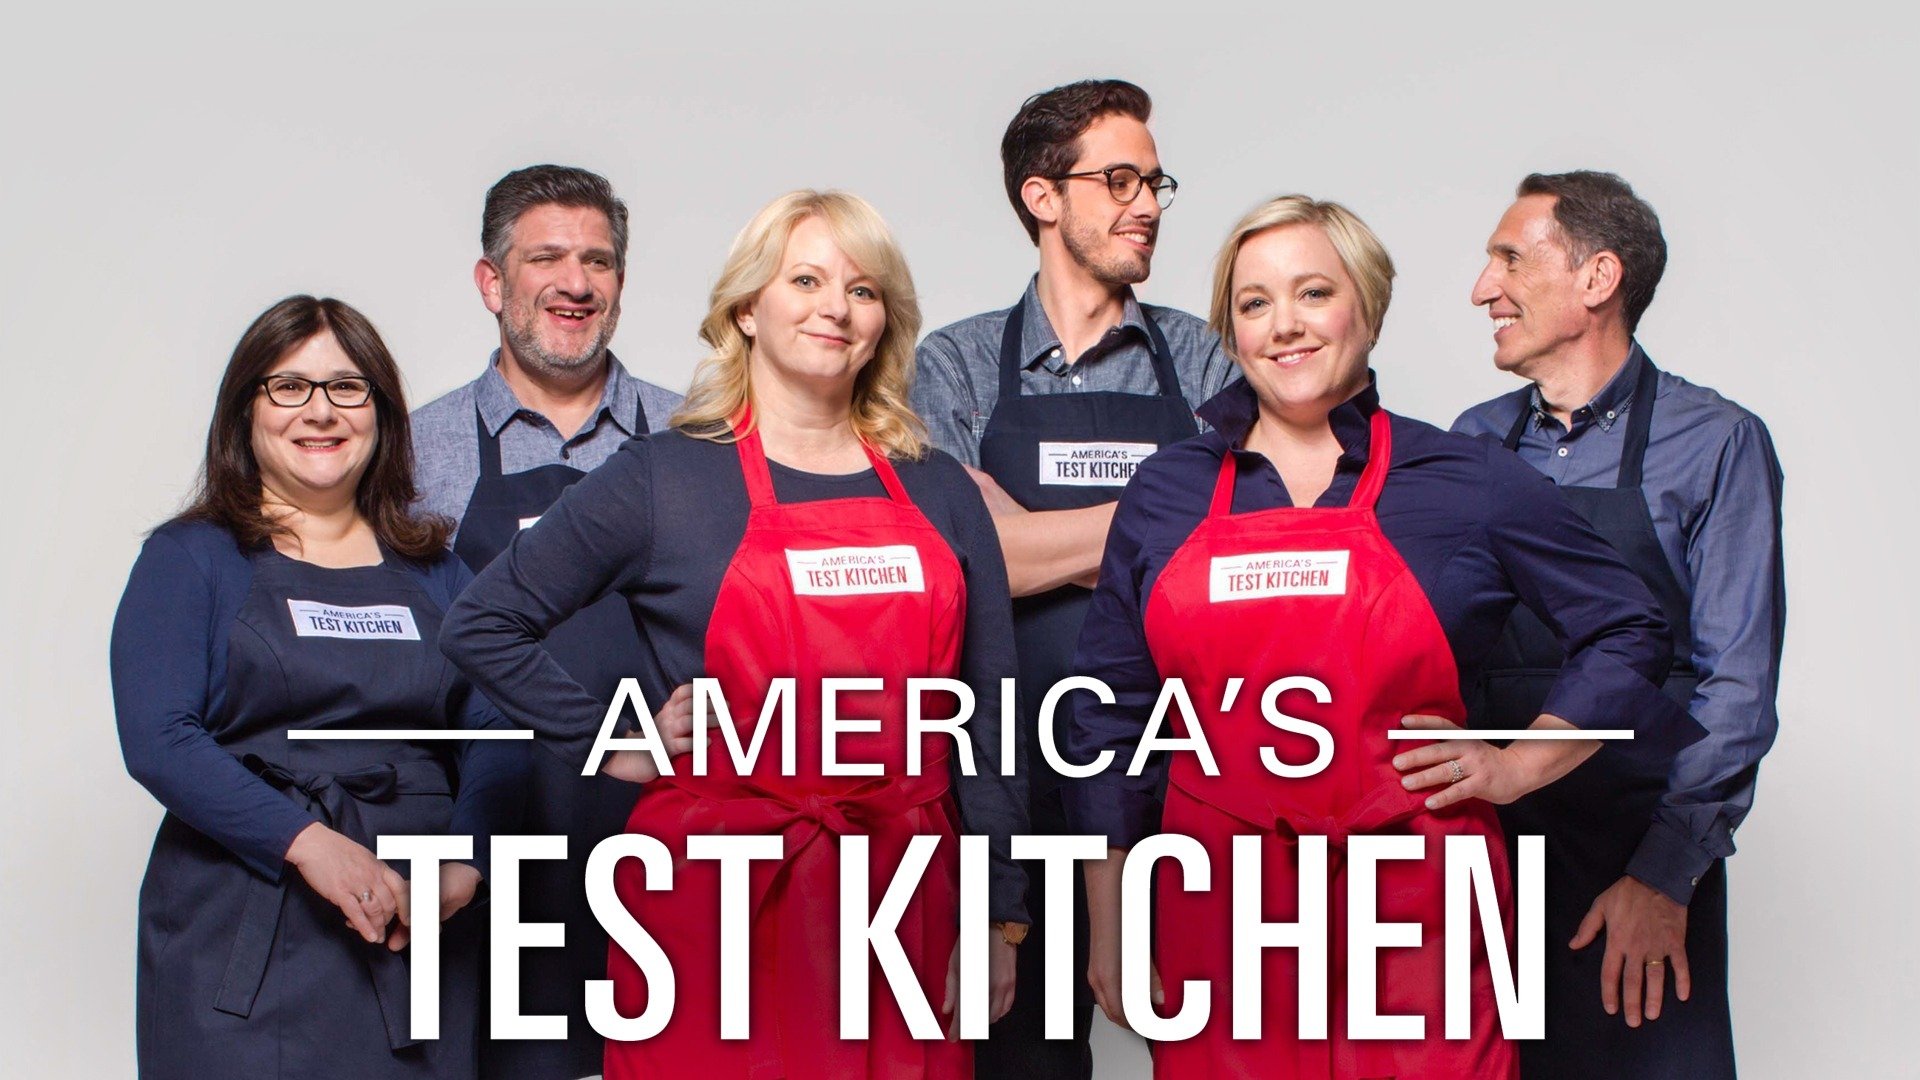 America's Test Kitchen - PBS Reality Series - Where To Watch